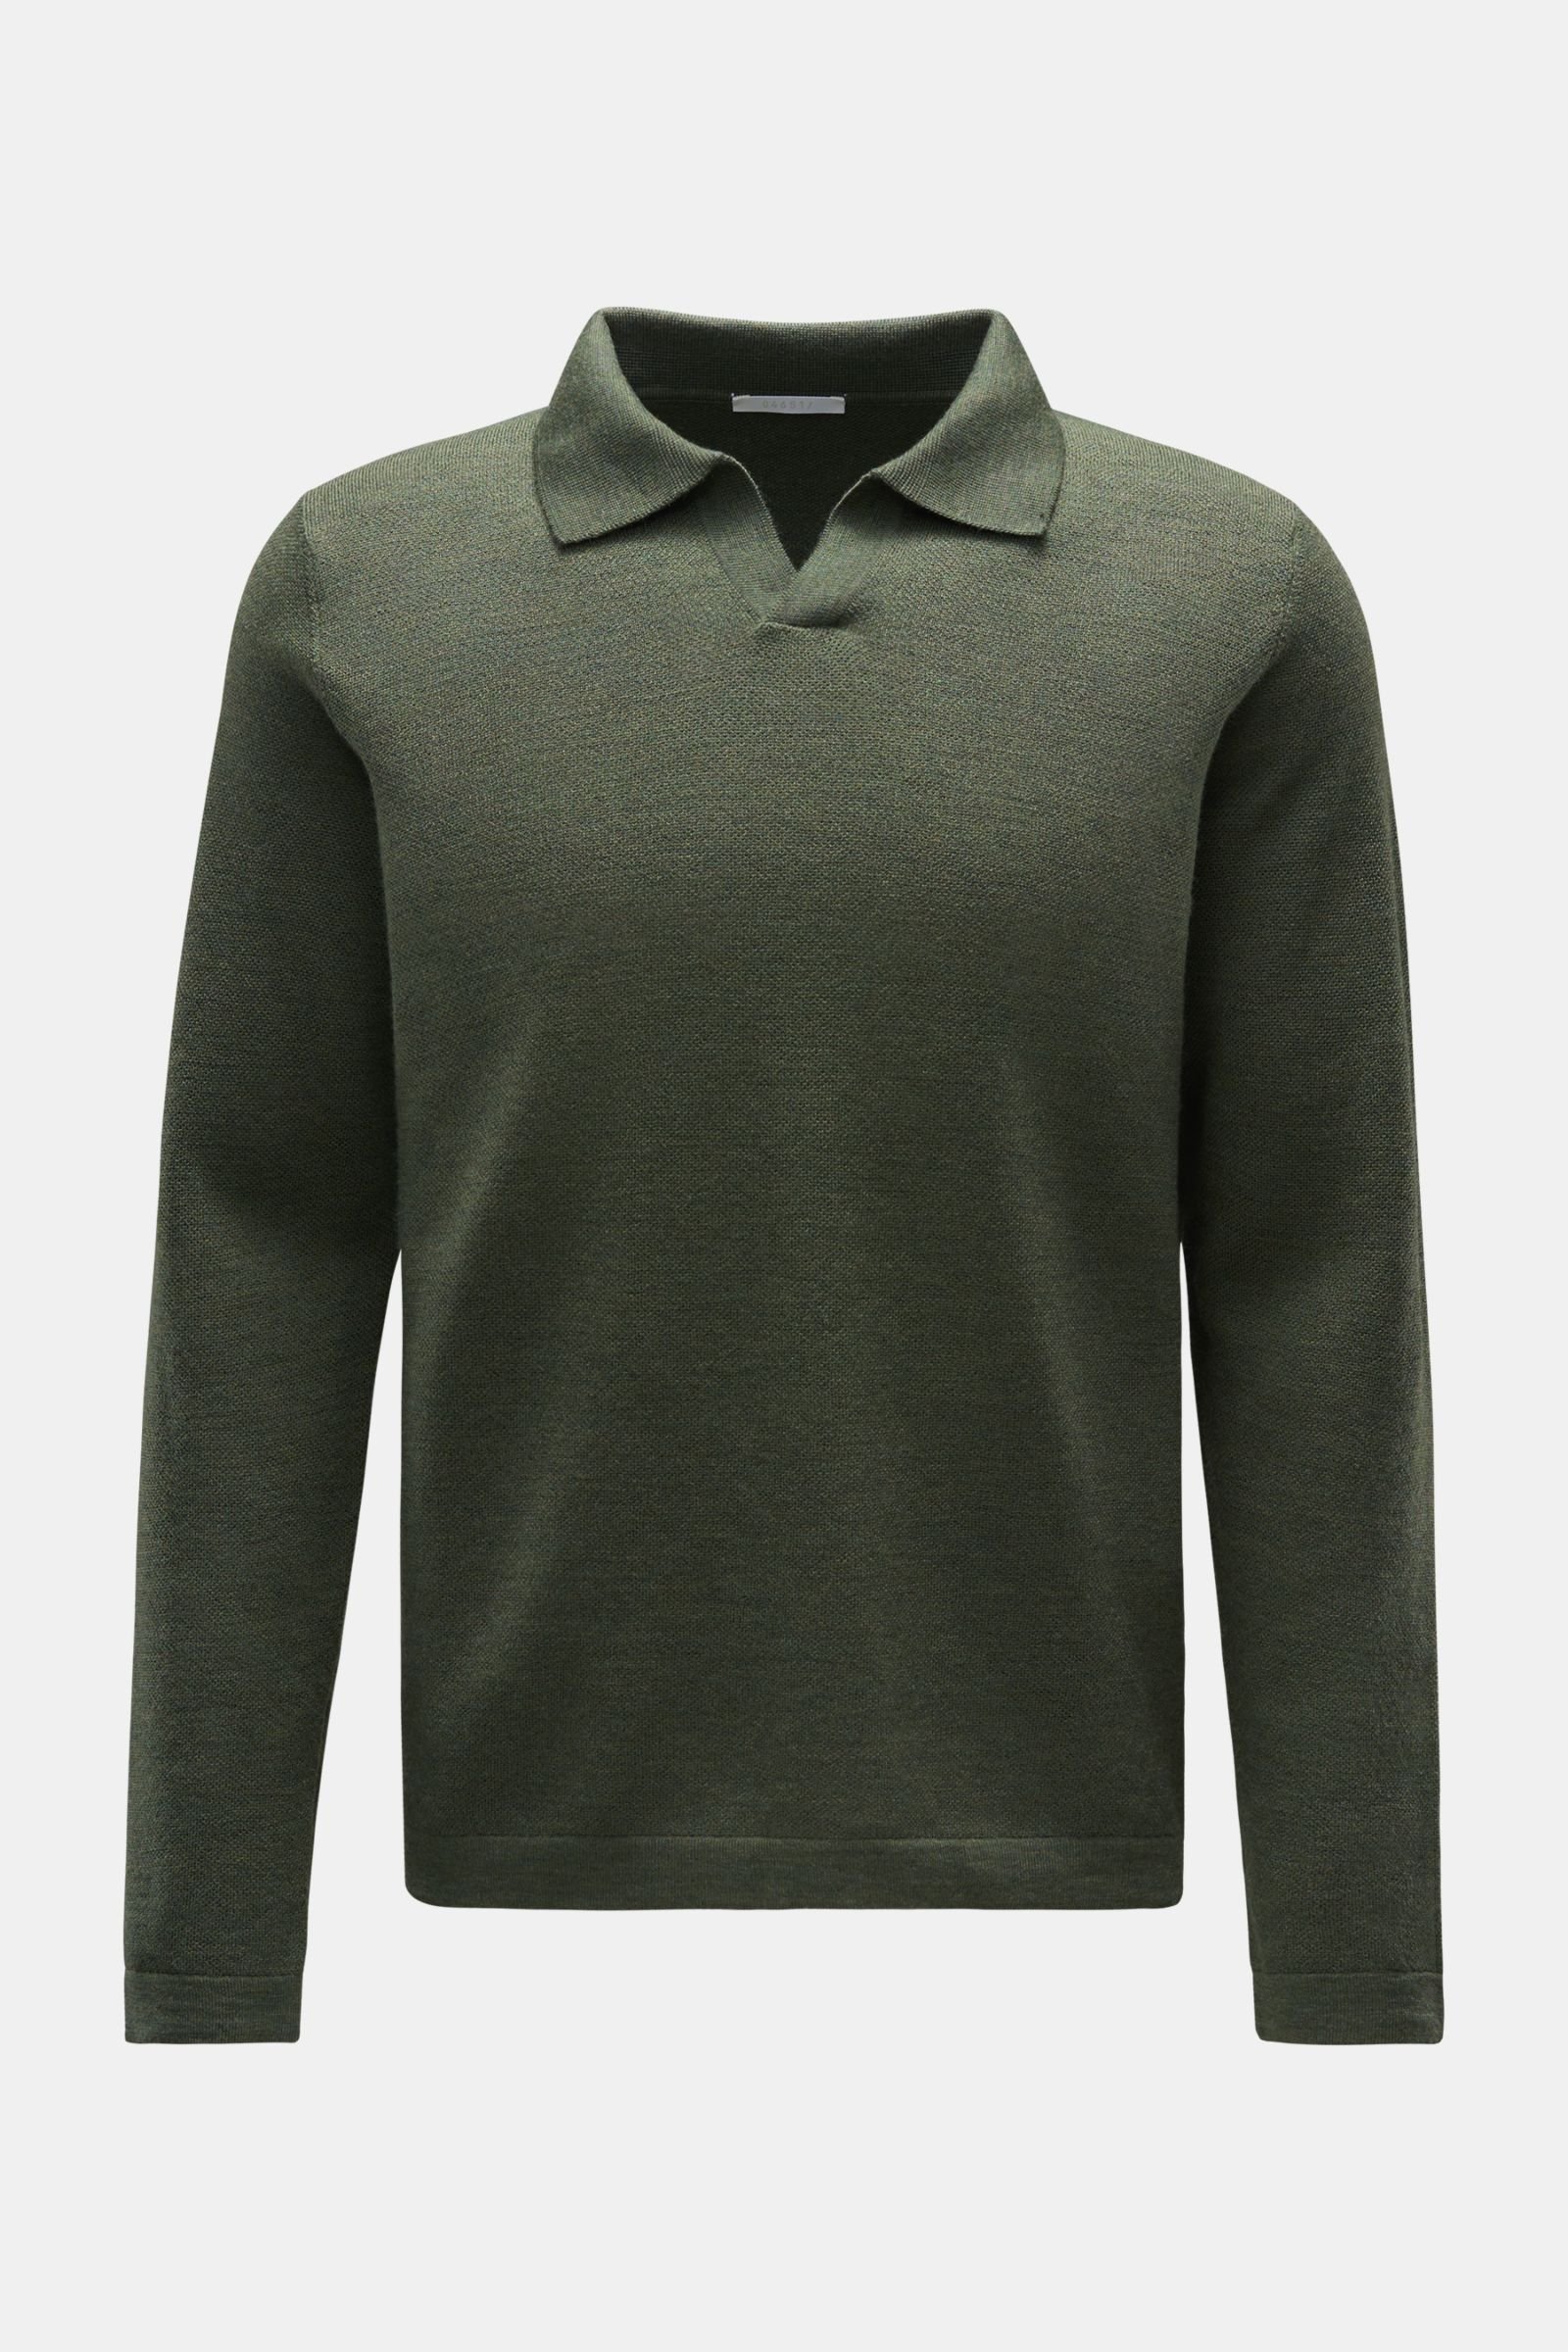 Merino knit polo 'Oyster' olive